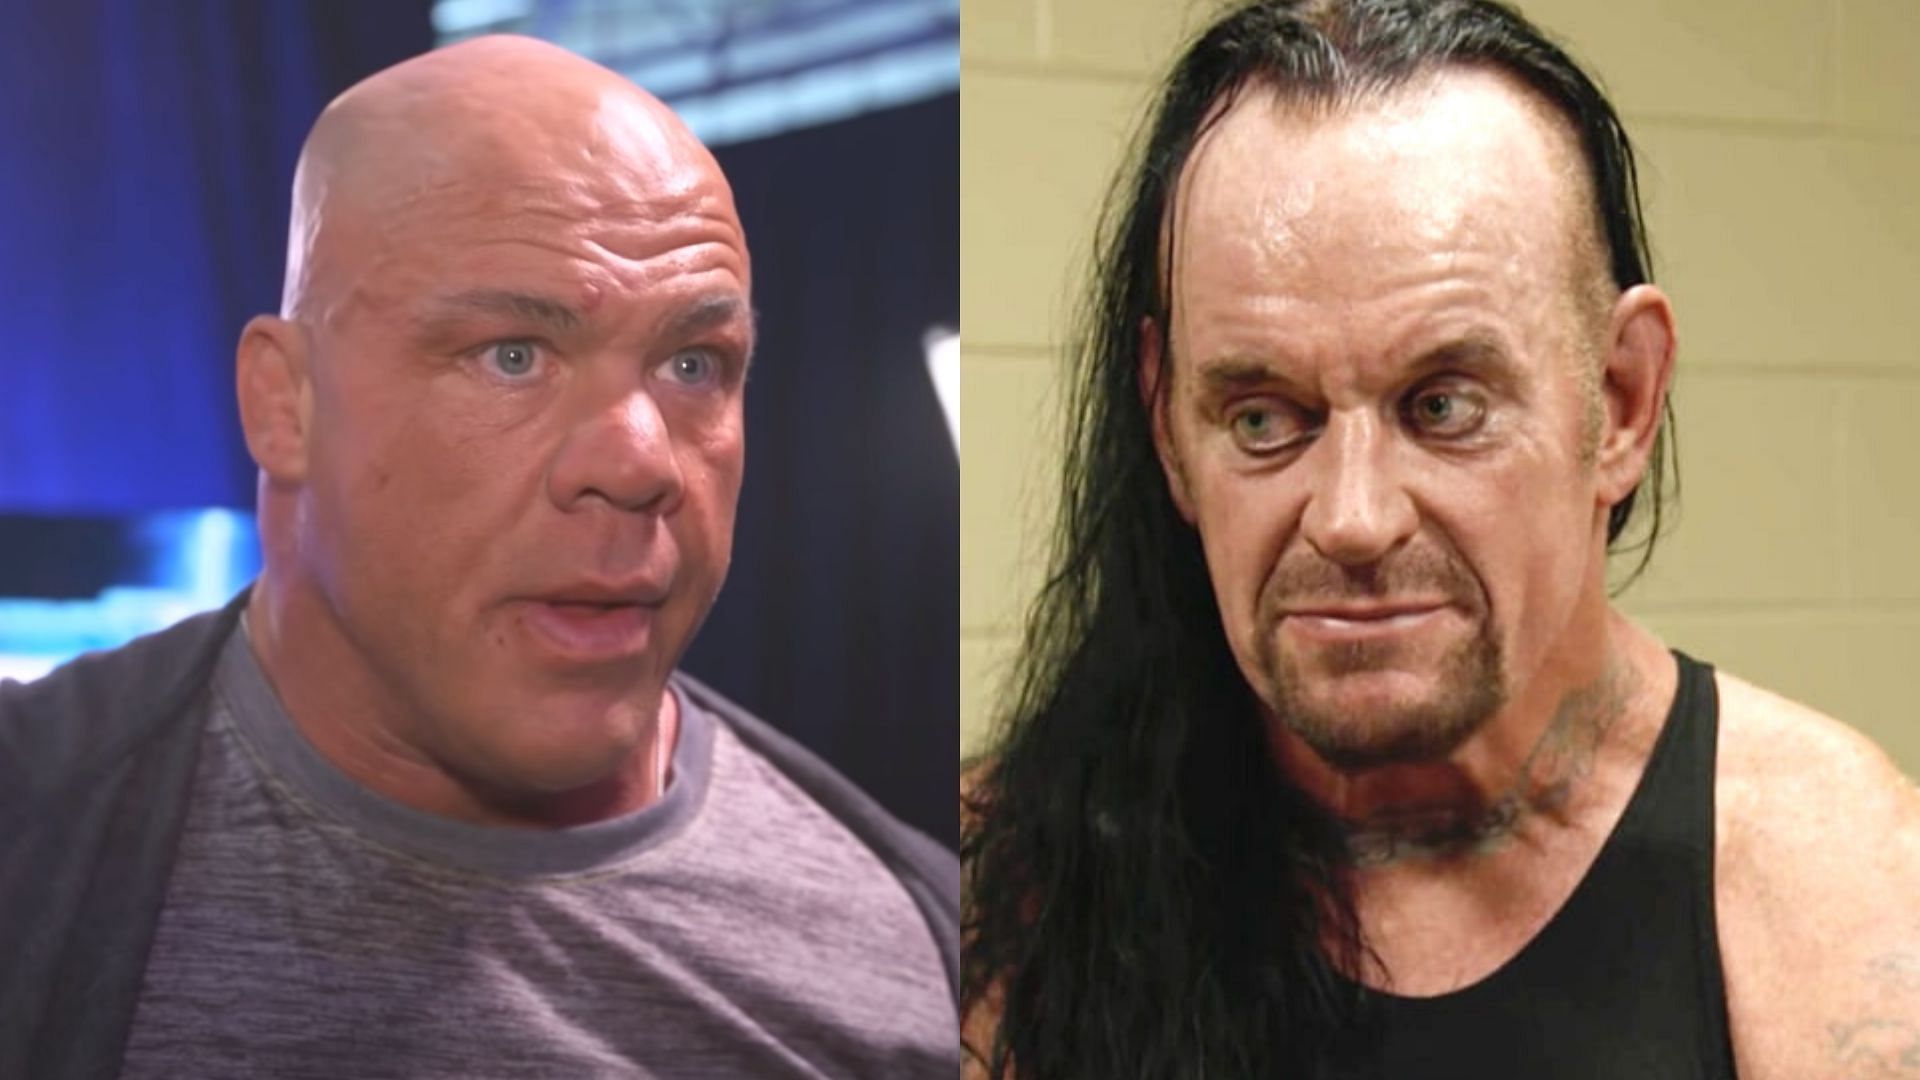 Kurt Angle and The Undertaker had several battles in WWE.